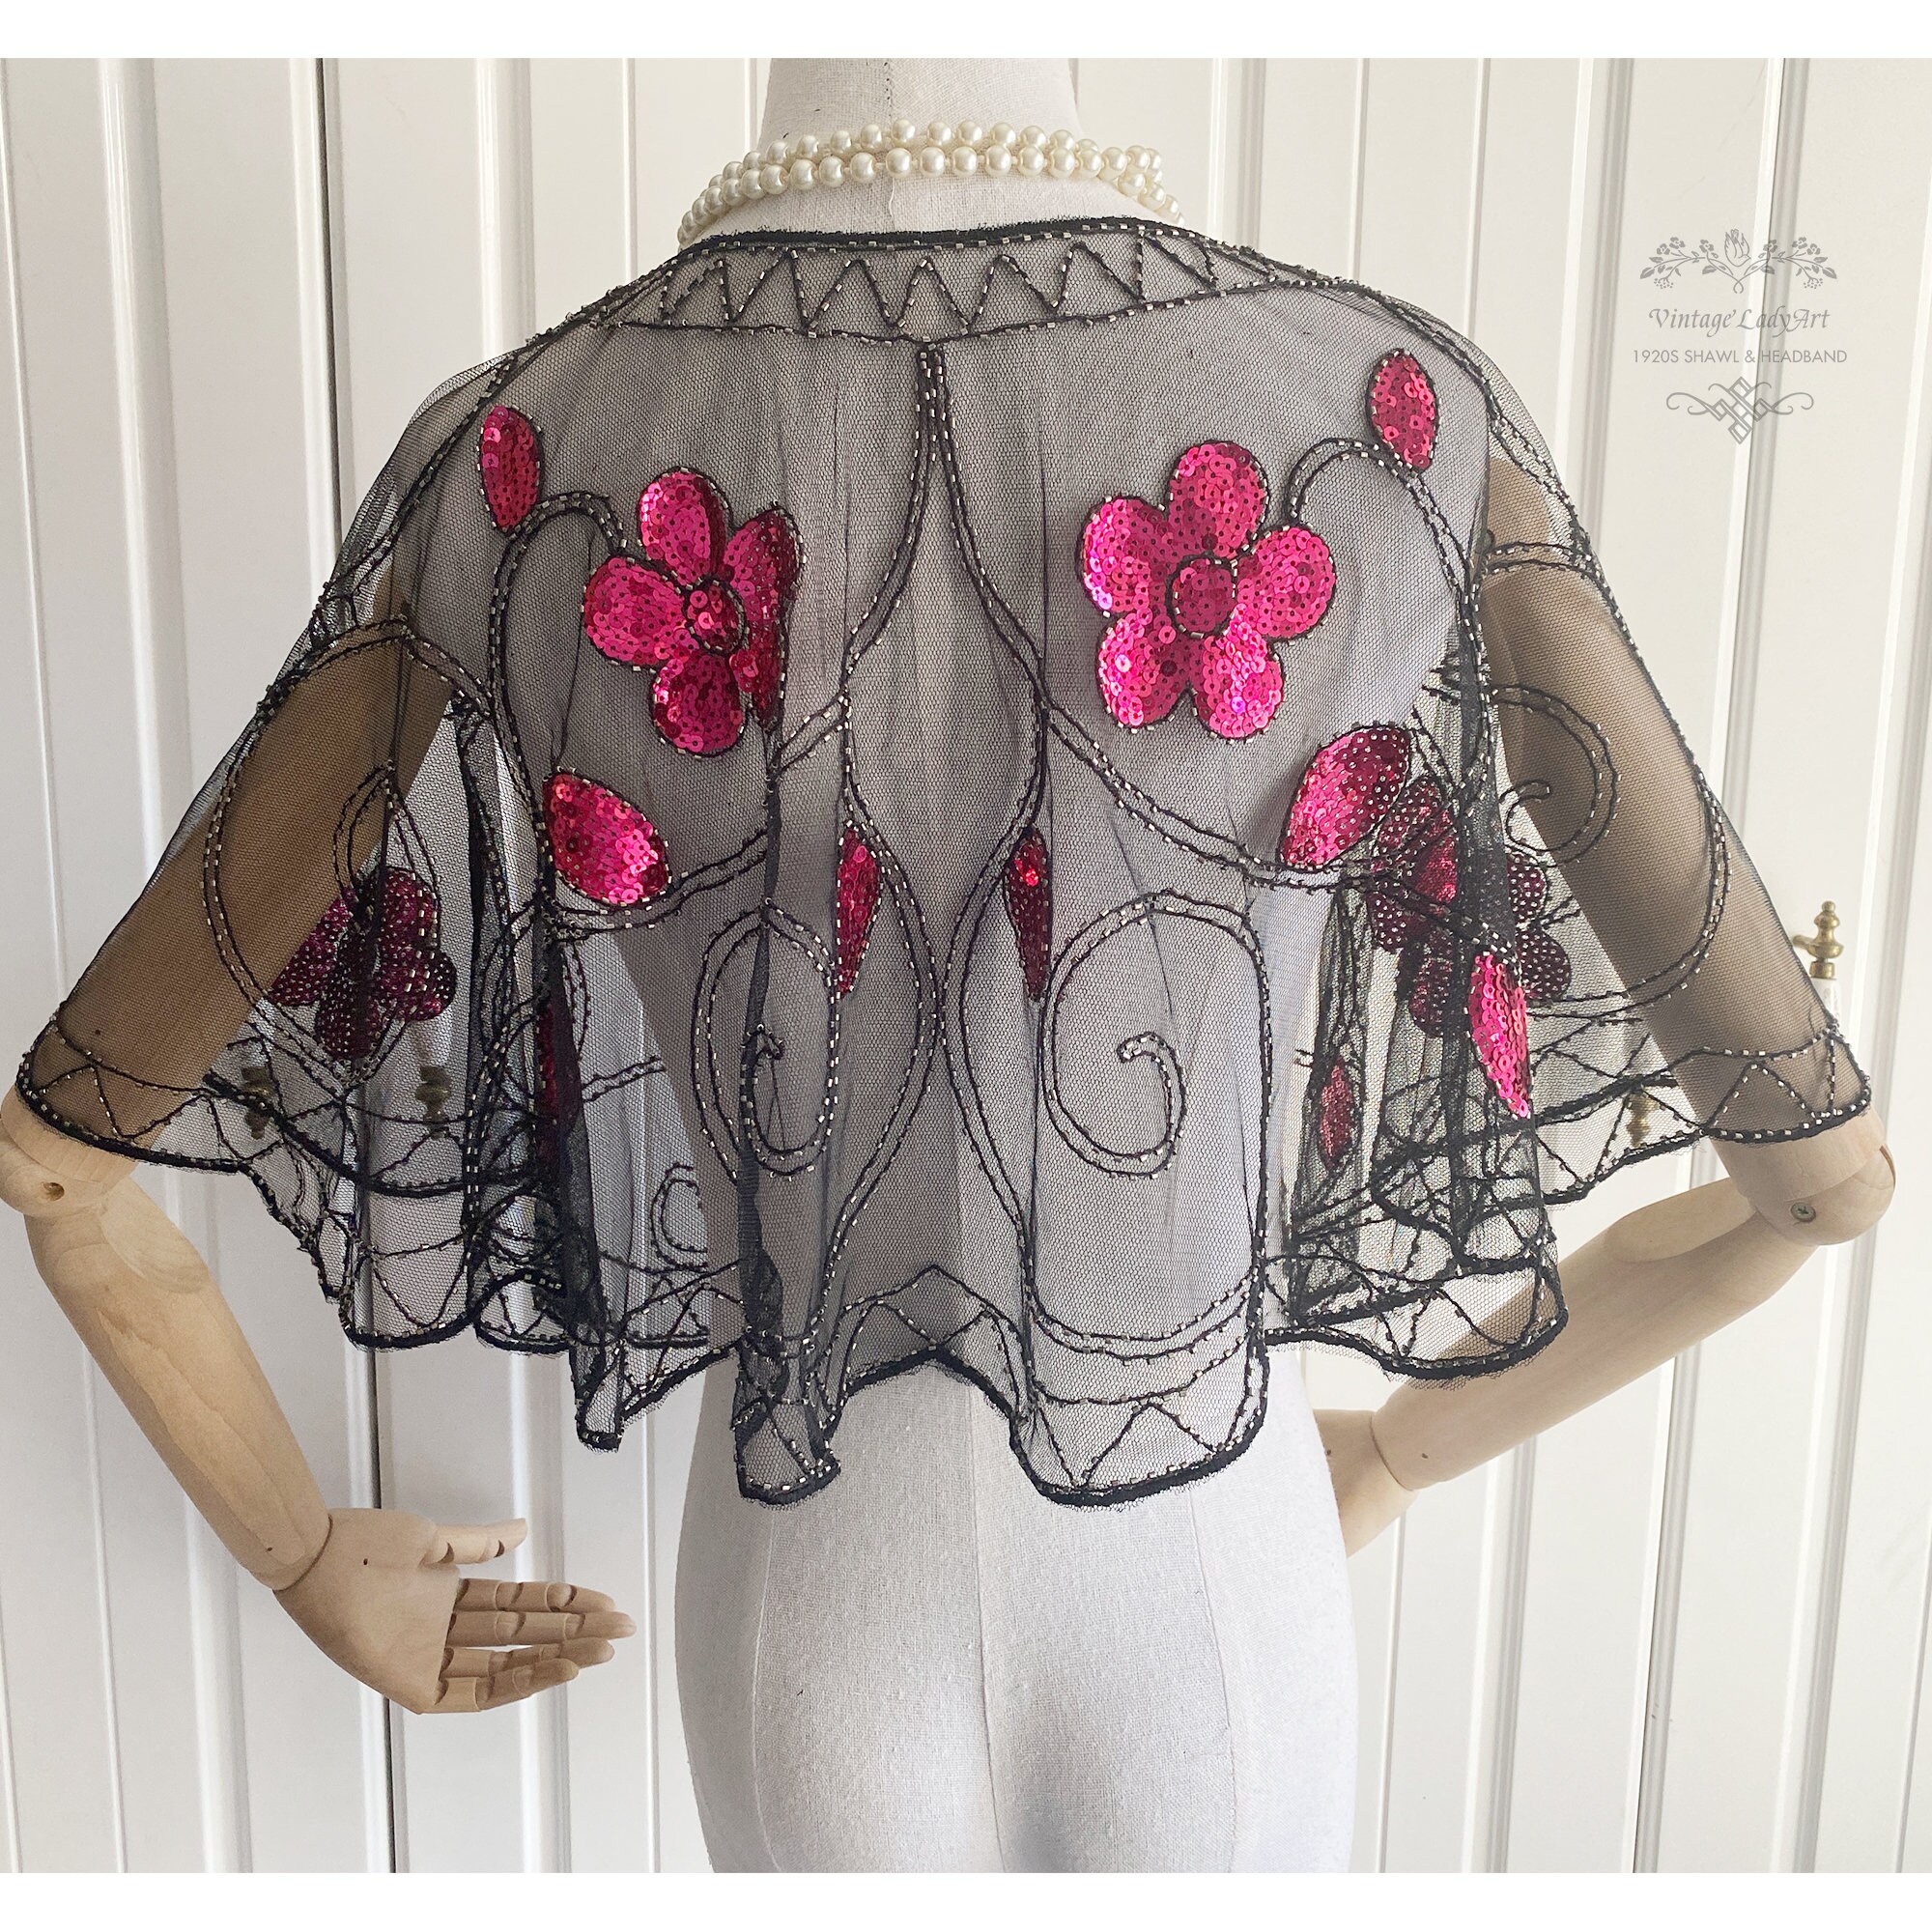 Floral Beaded Mesh Capelet with Scalloped Edge / Gatsby | Etsy